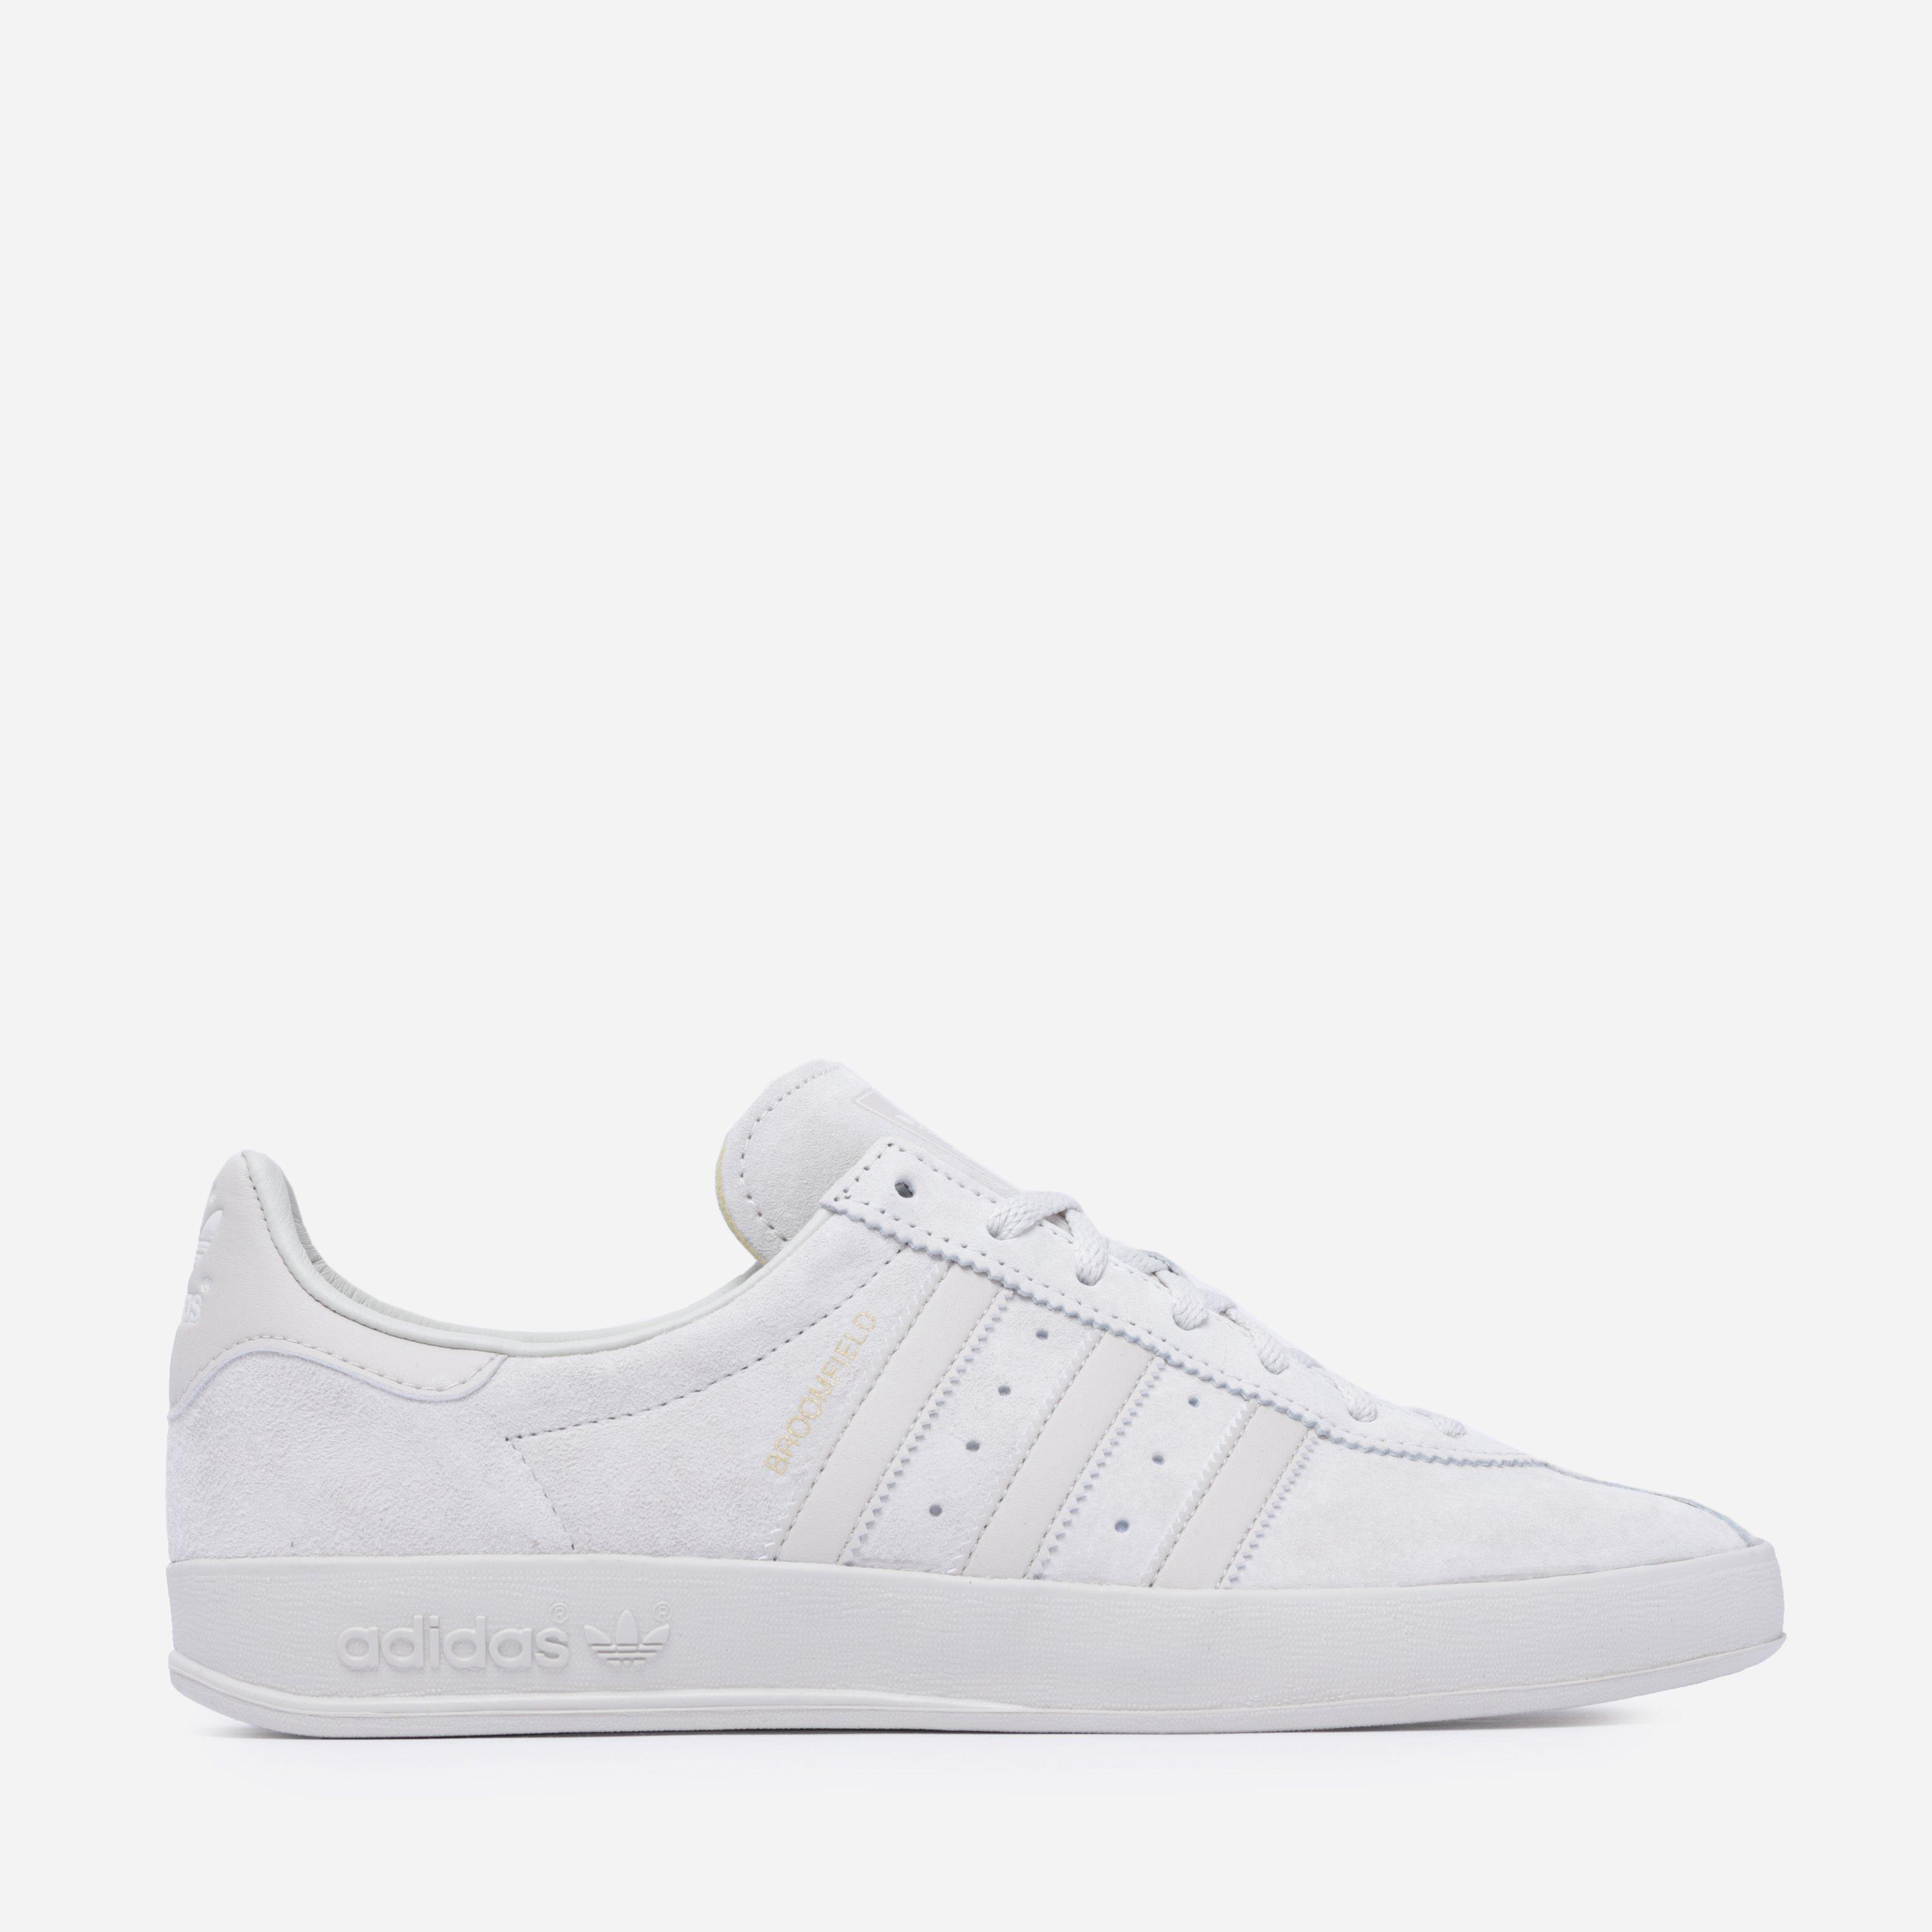 adidas Originals Lace Broomfield in White for Men - Lyst